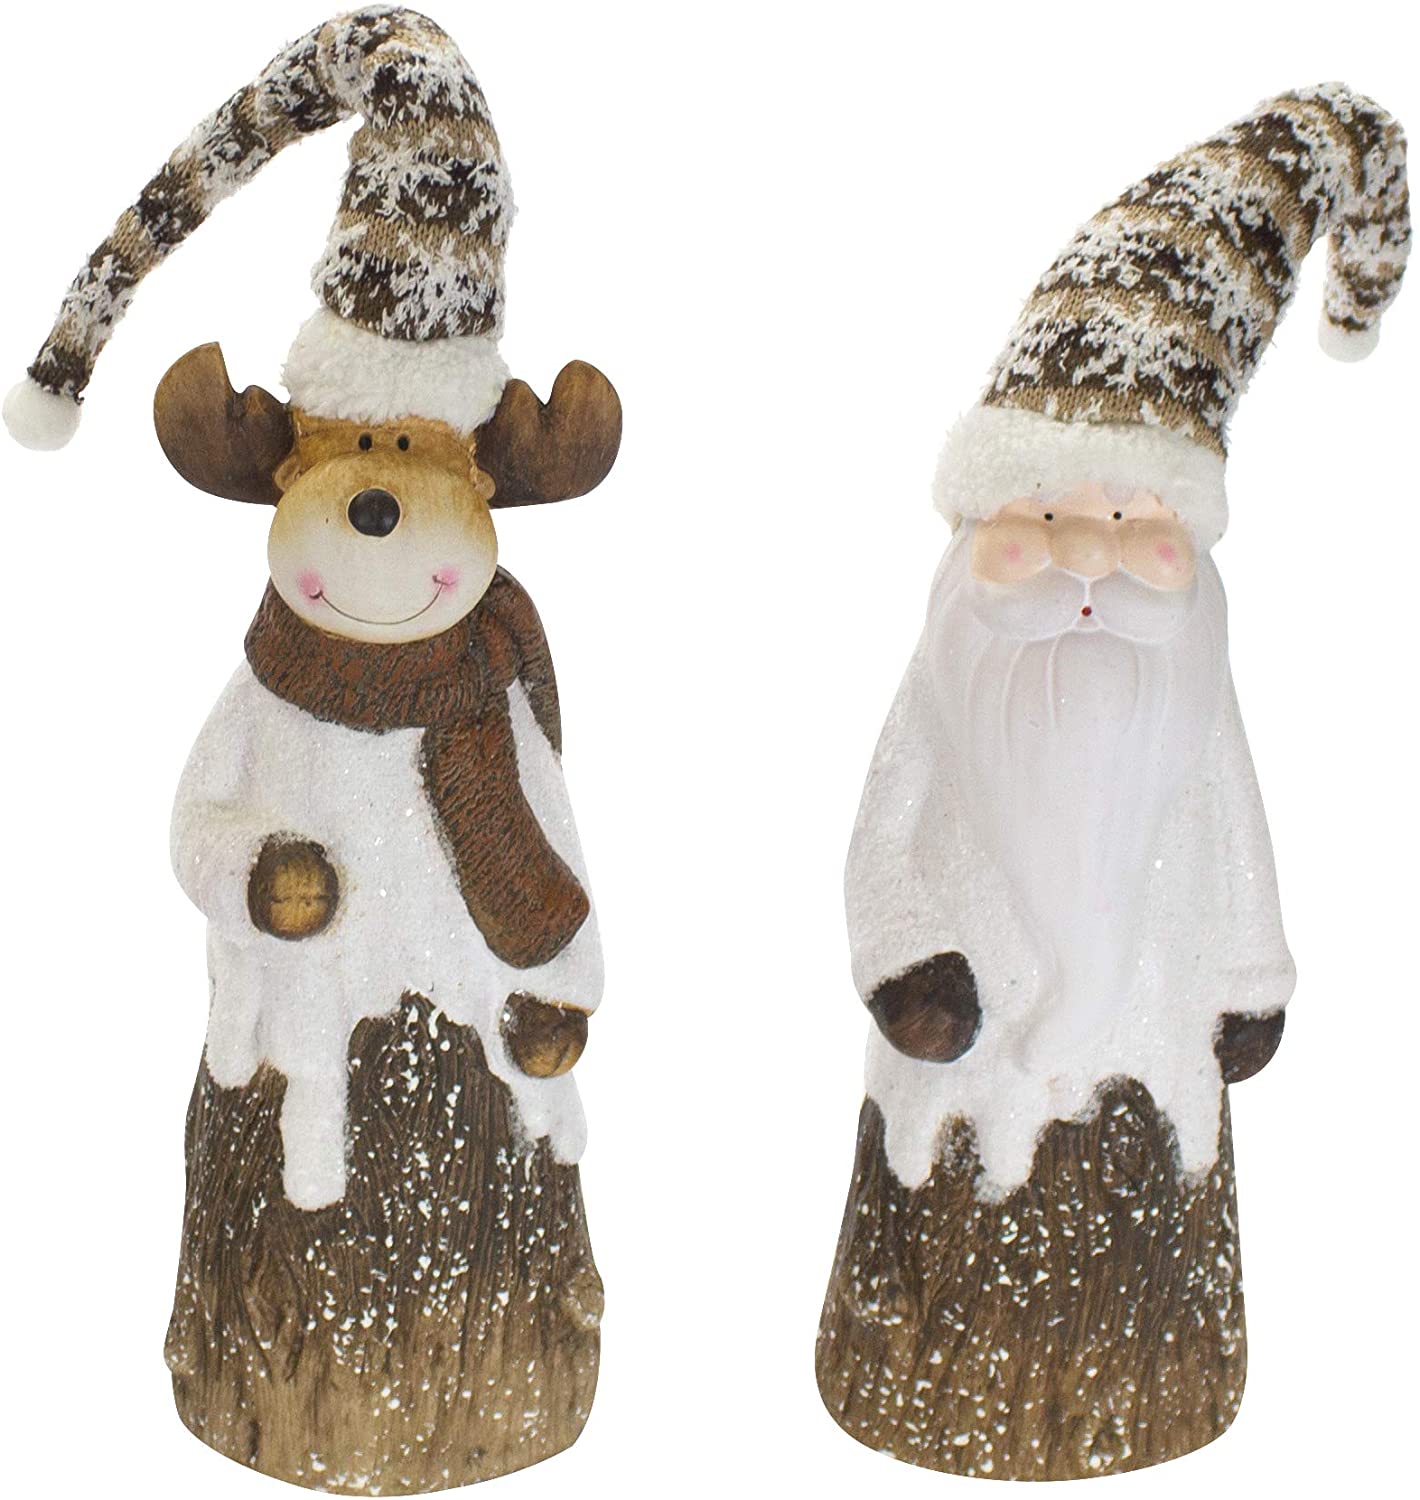 Decorative Christmas Figurine with Fabric Hat